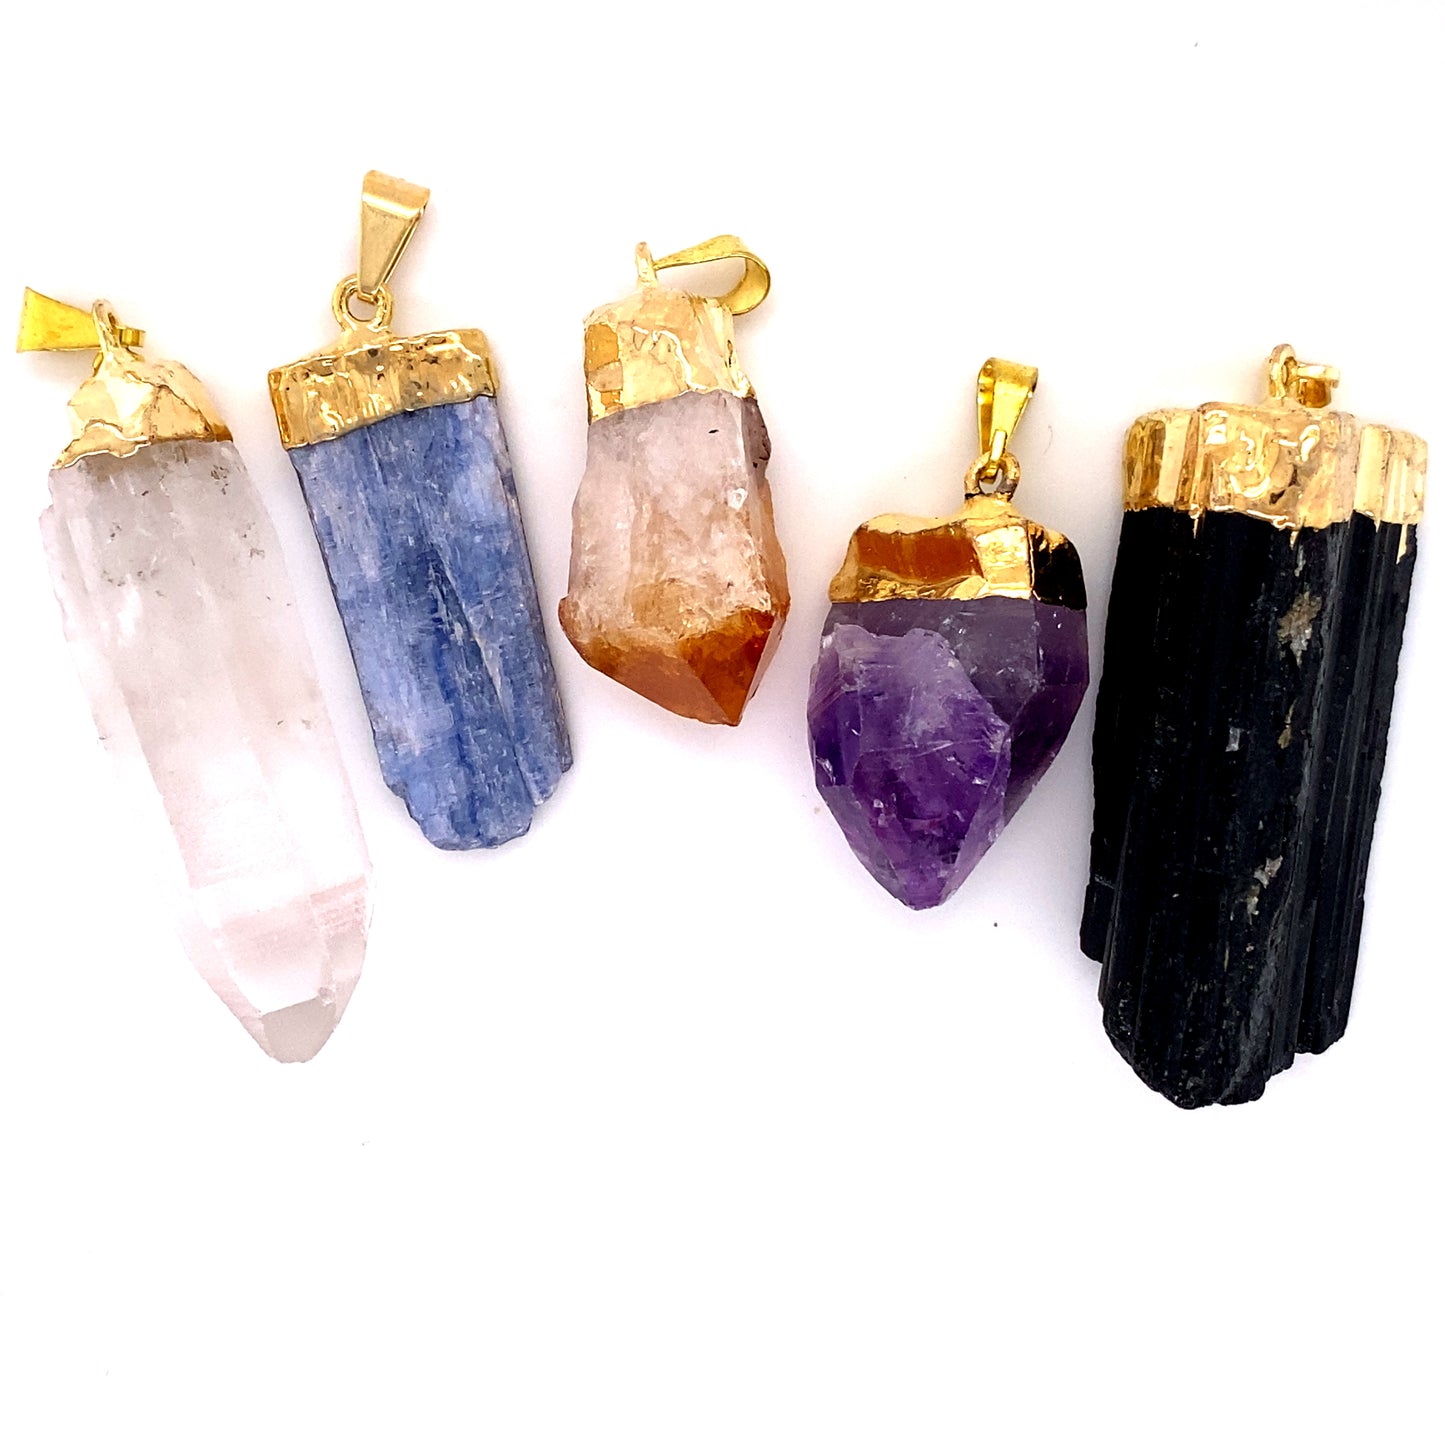 Four various types of Super Silver Raw Crystal Pendants with Gold Cap, including raw crystal options.